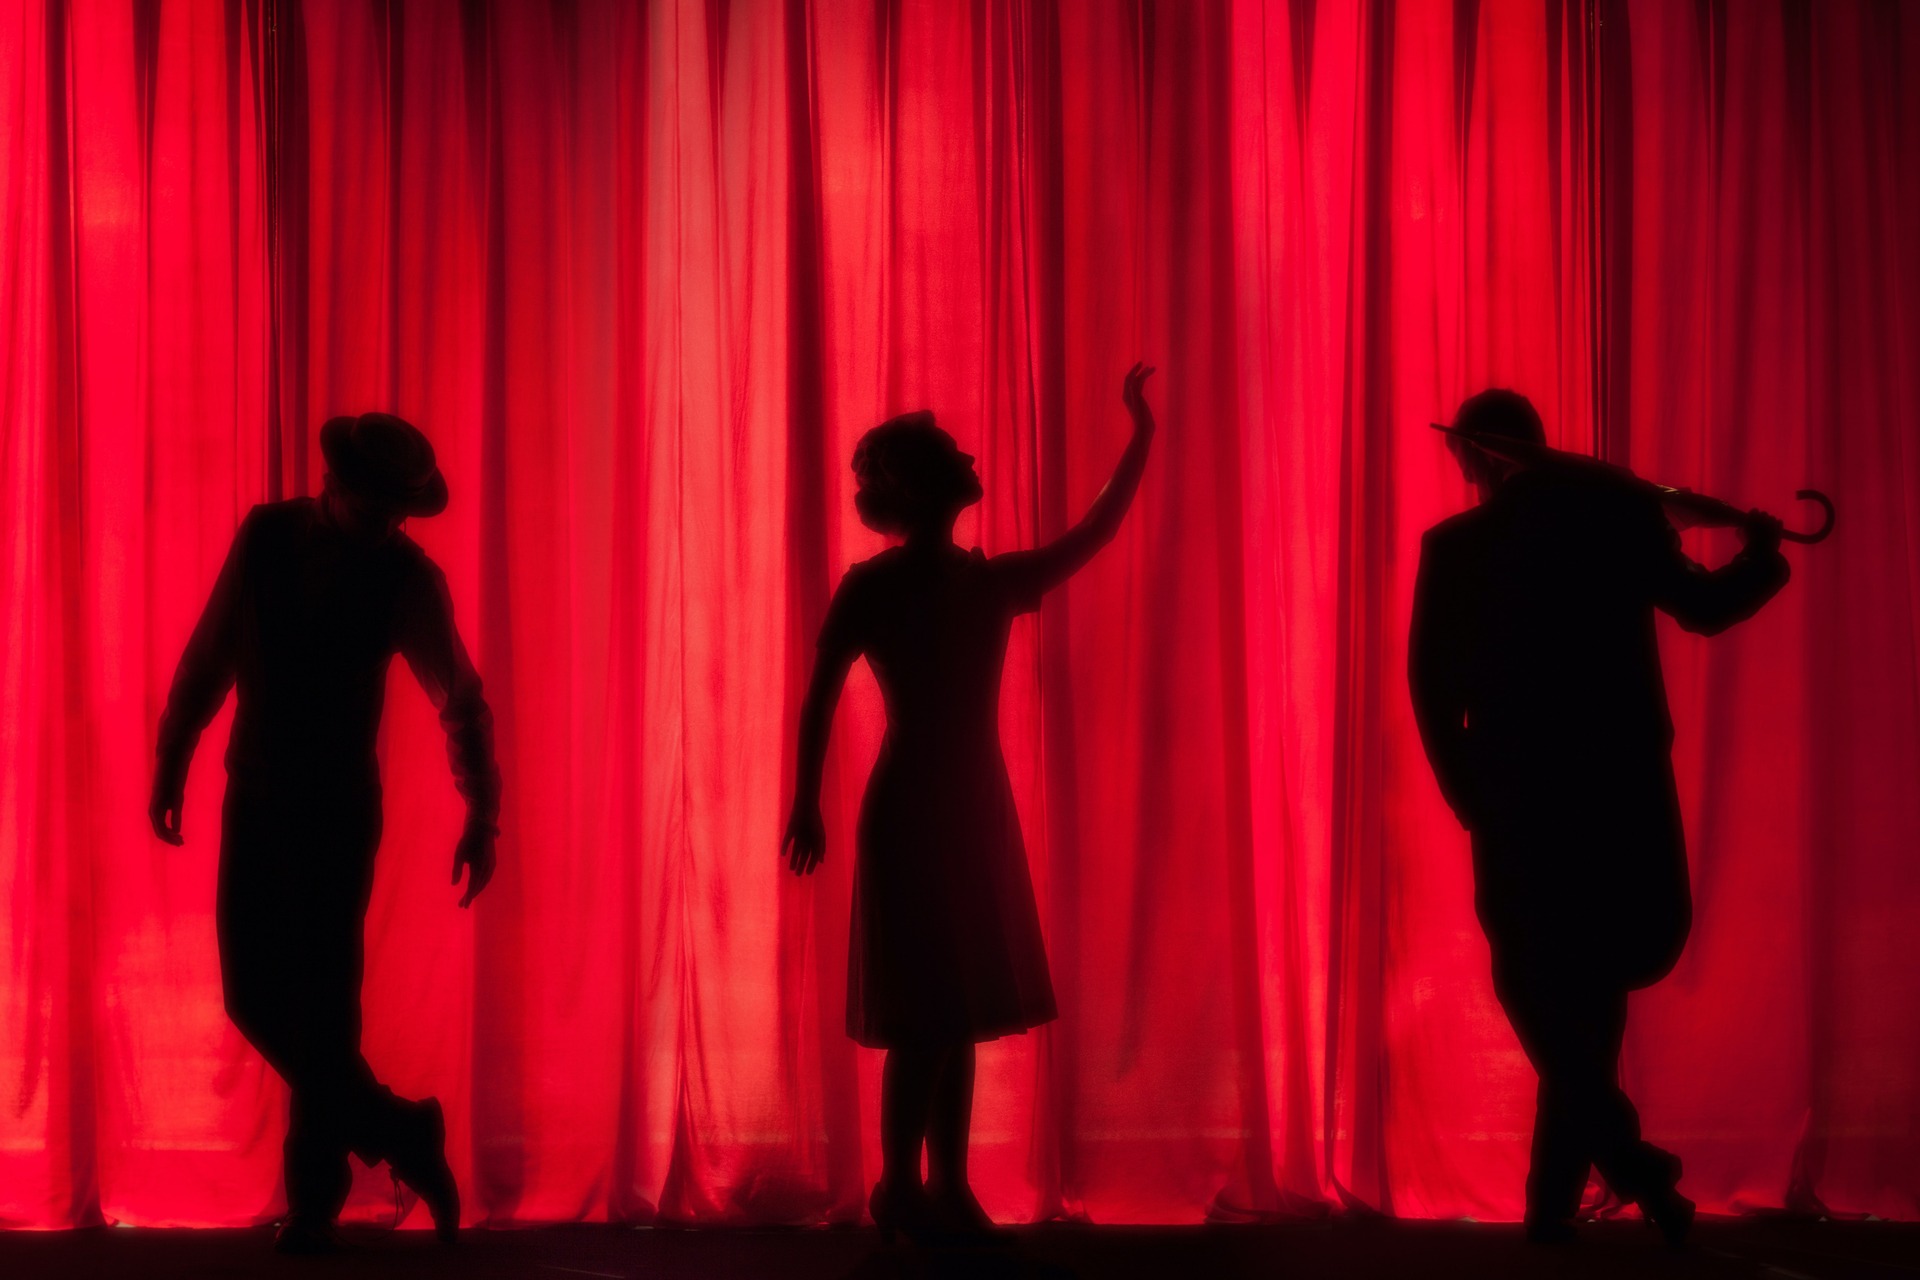 Three actors on stage in front of a red curtain